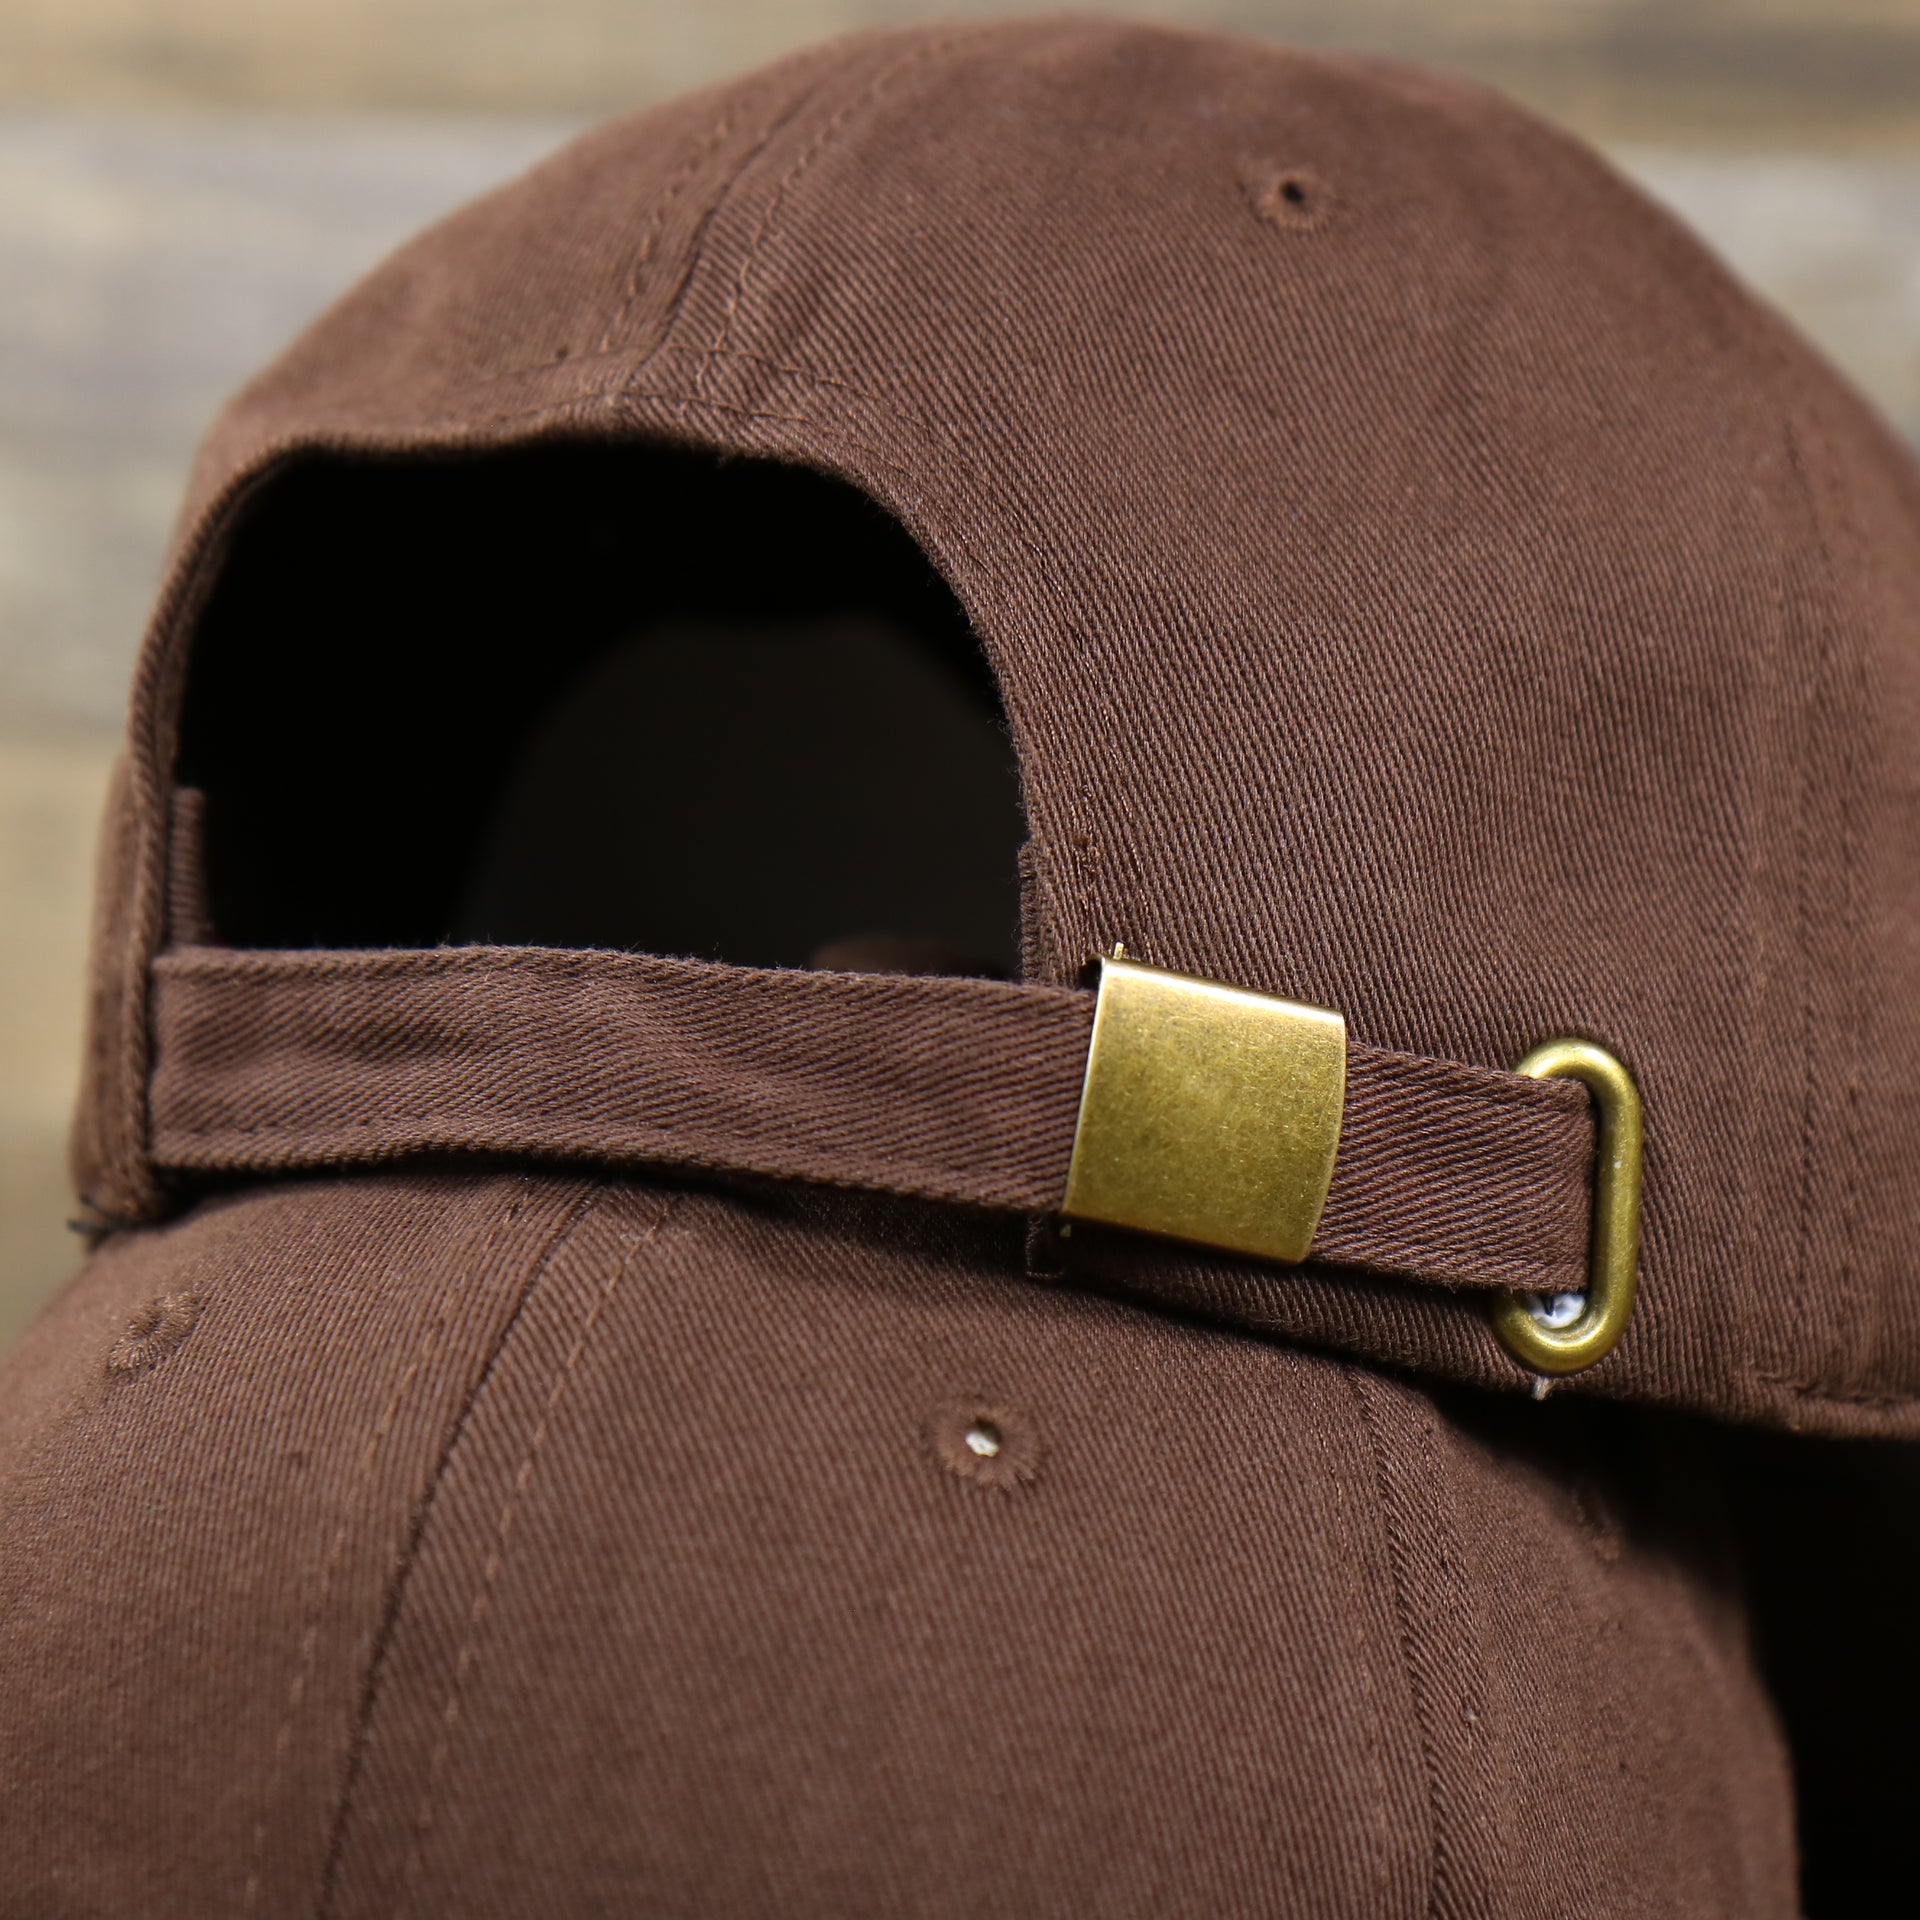 The Brown Adjustable Strap with Metallic Buckle on the Chocolate Bent Brim Blank Baseball Hat | Brown Dad Hat